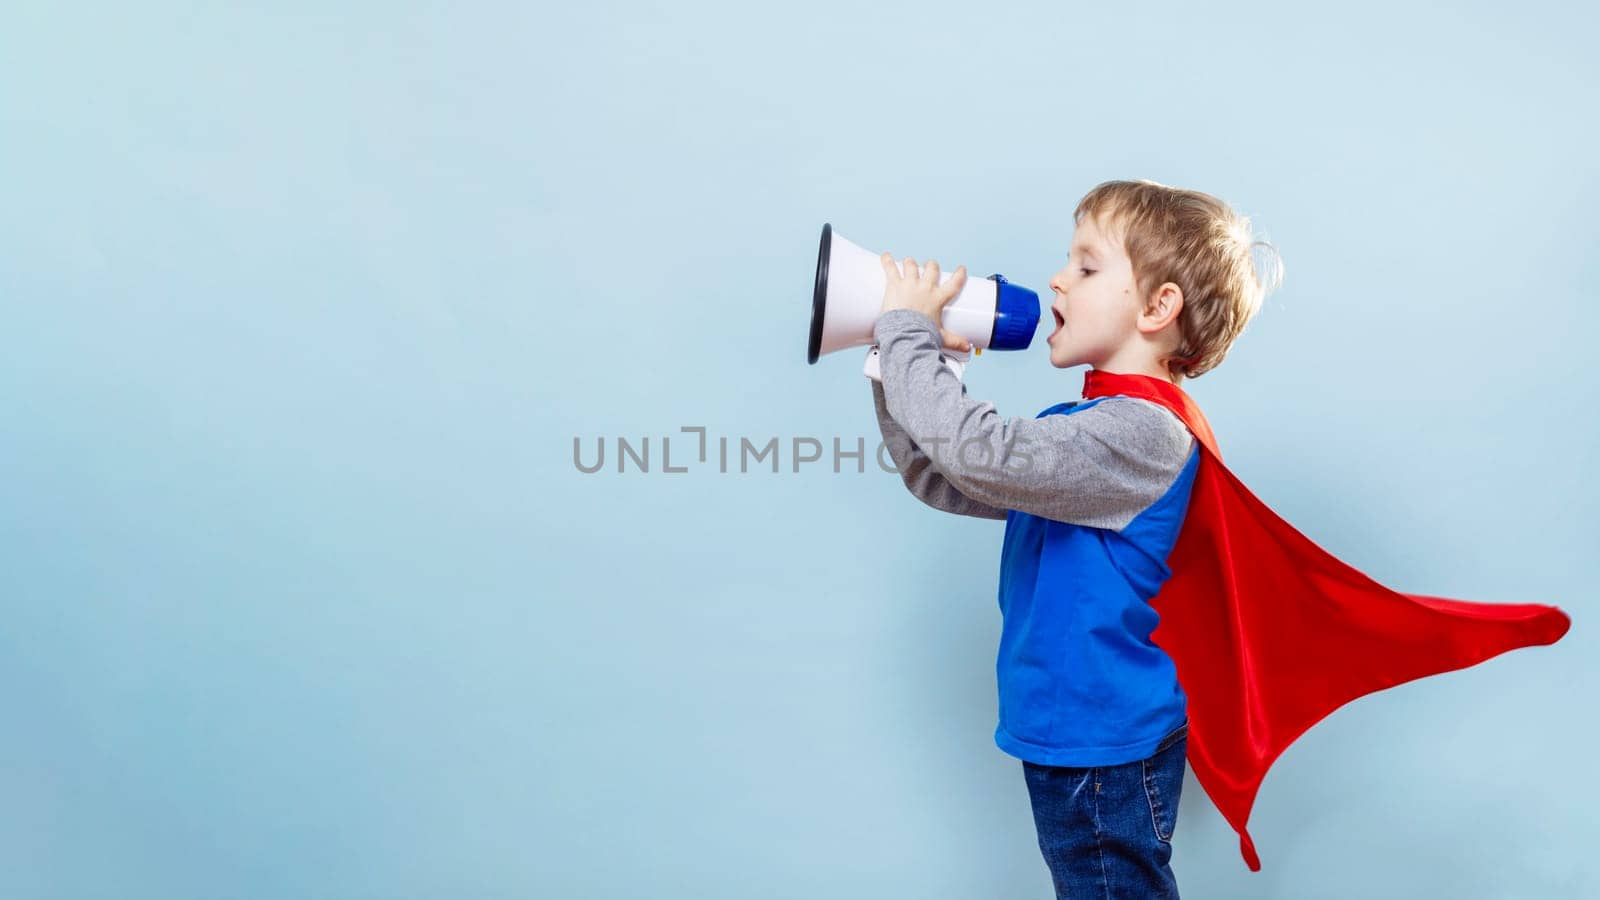 Young boy in superhero cape shouting through megaphone on blue background. Childhood play and imagination concept for poster design.